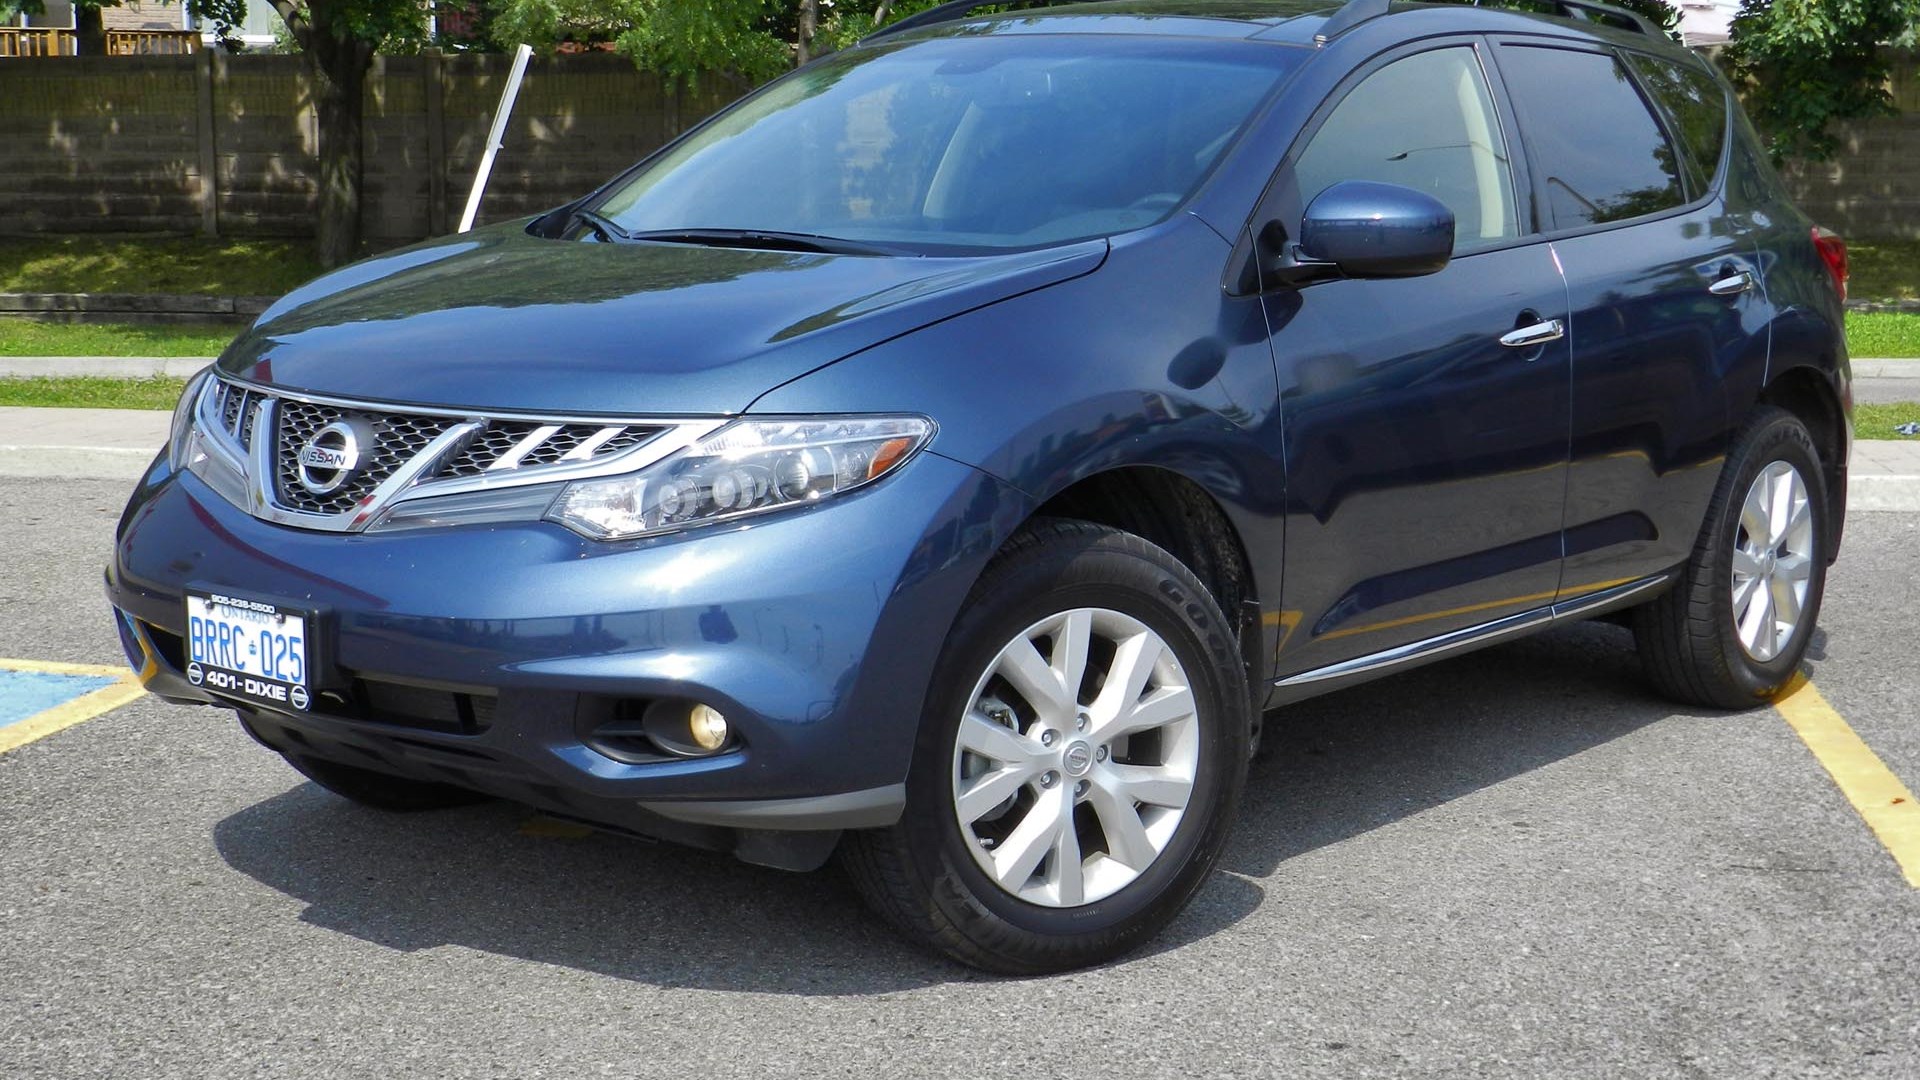 Used Nissan Murano Review - 2009-2014 | AutoTrader.ca